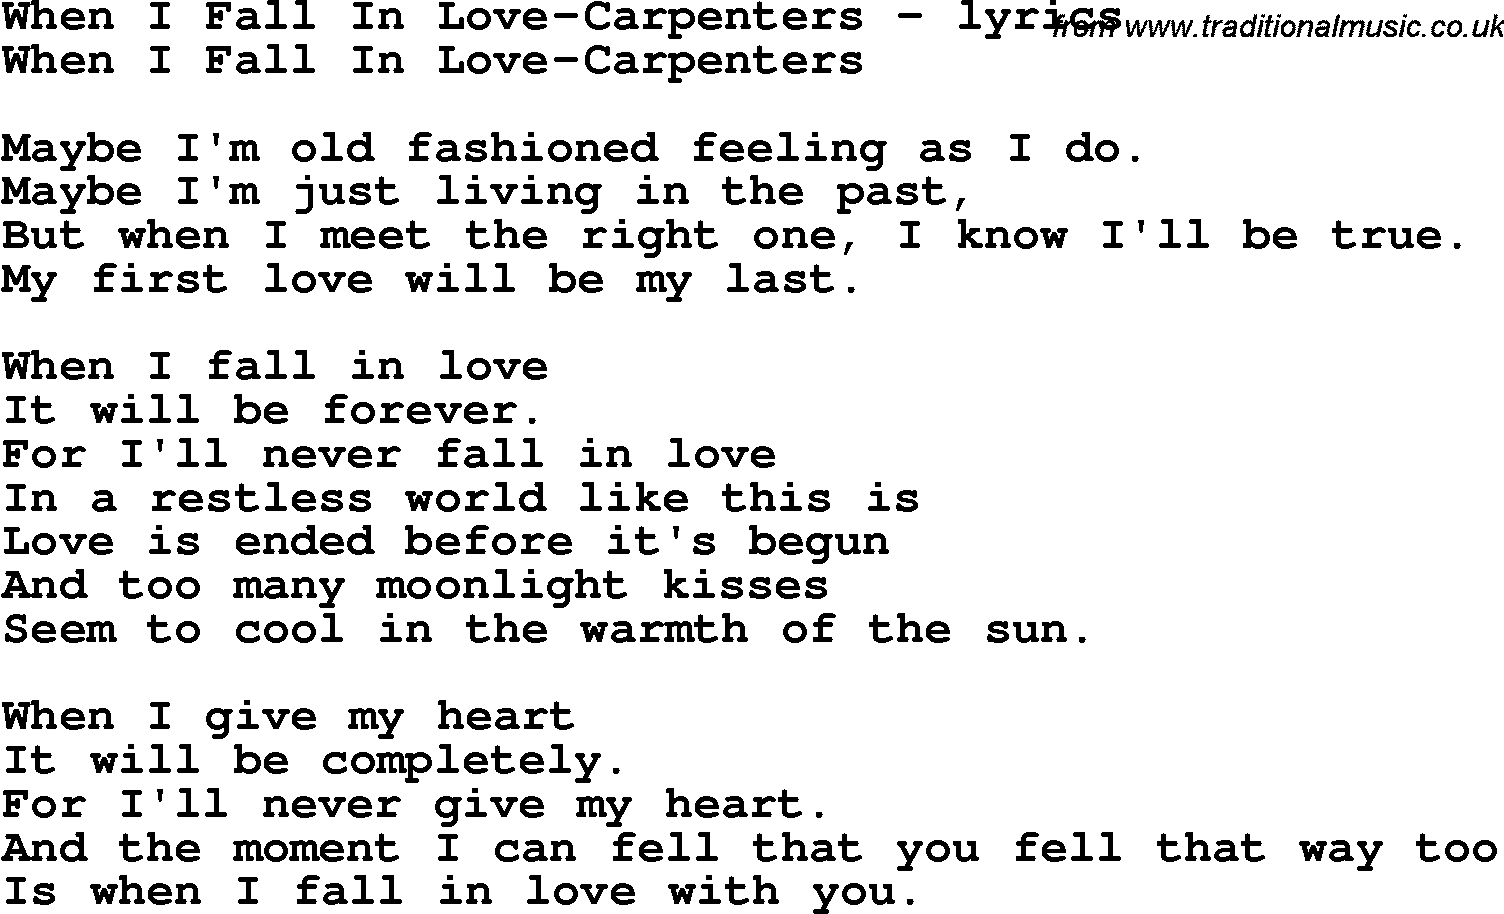 Love Song Lyrics for: When I Fall In Love-Carpenters